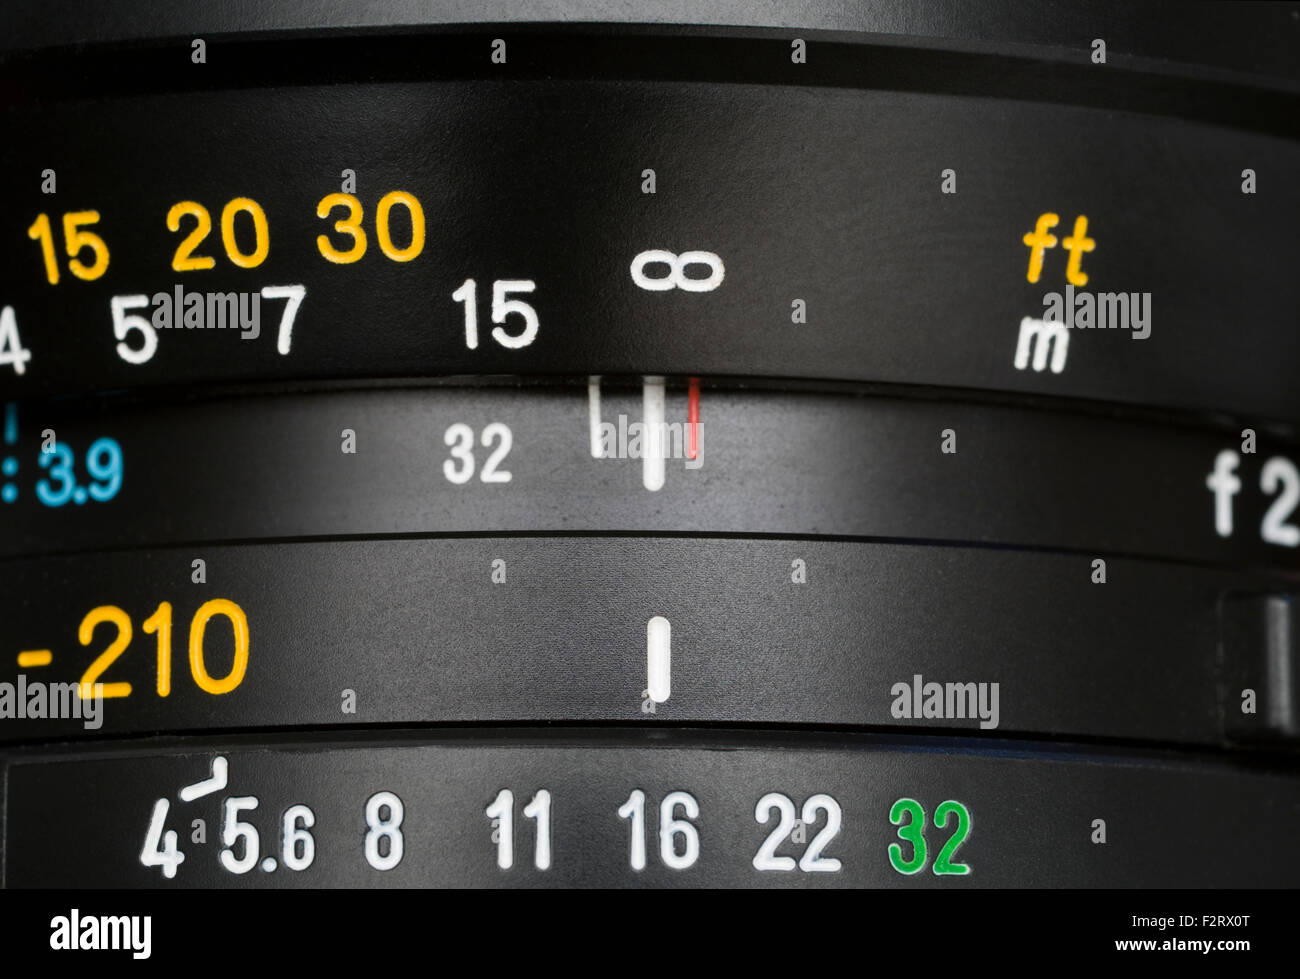 DOF and distance scale on camera lens Stock Photo